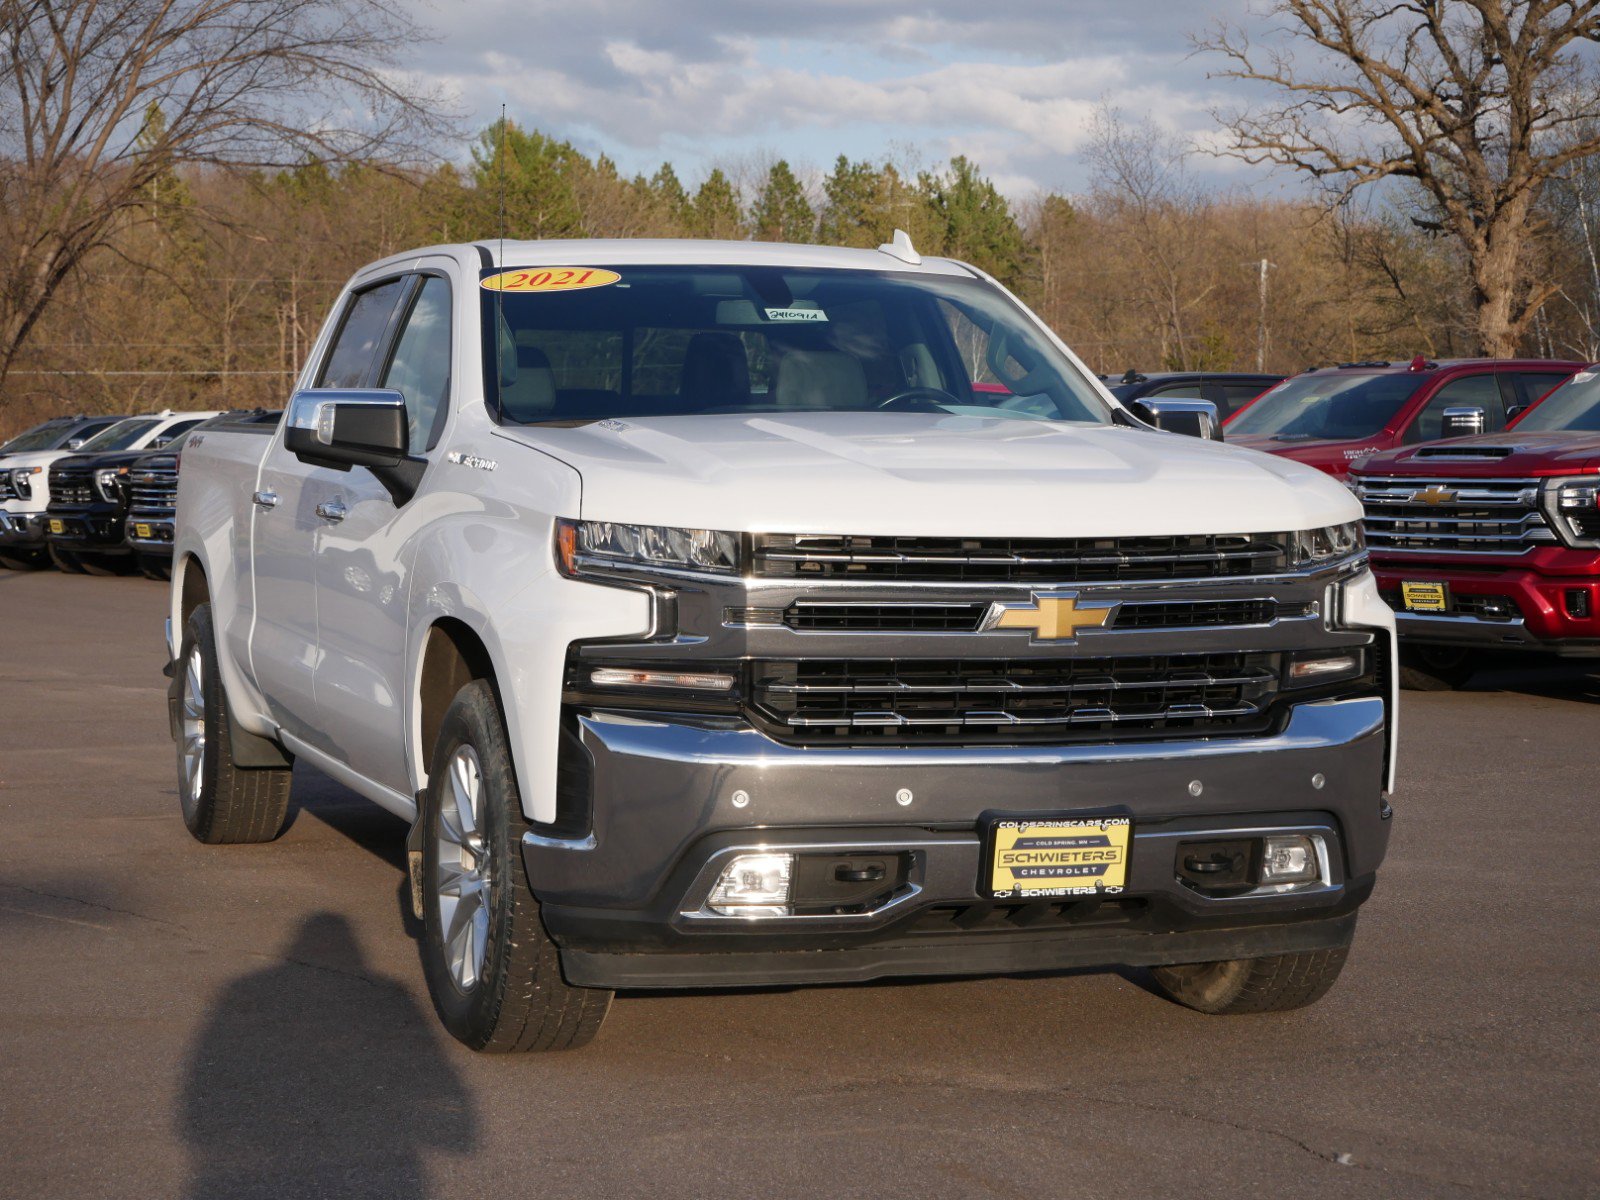 Used 2021 Chevrolet Silverado 1500 LTZ with VIN 3GCUYGET0MG269459 for sale in Cold Spring, Minnesota